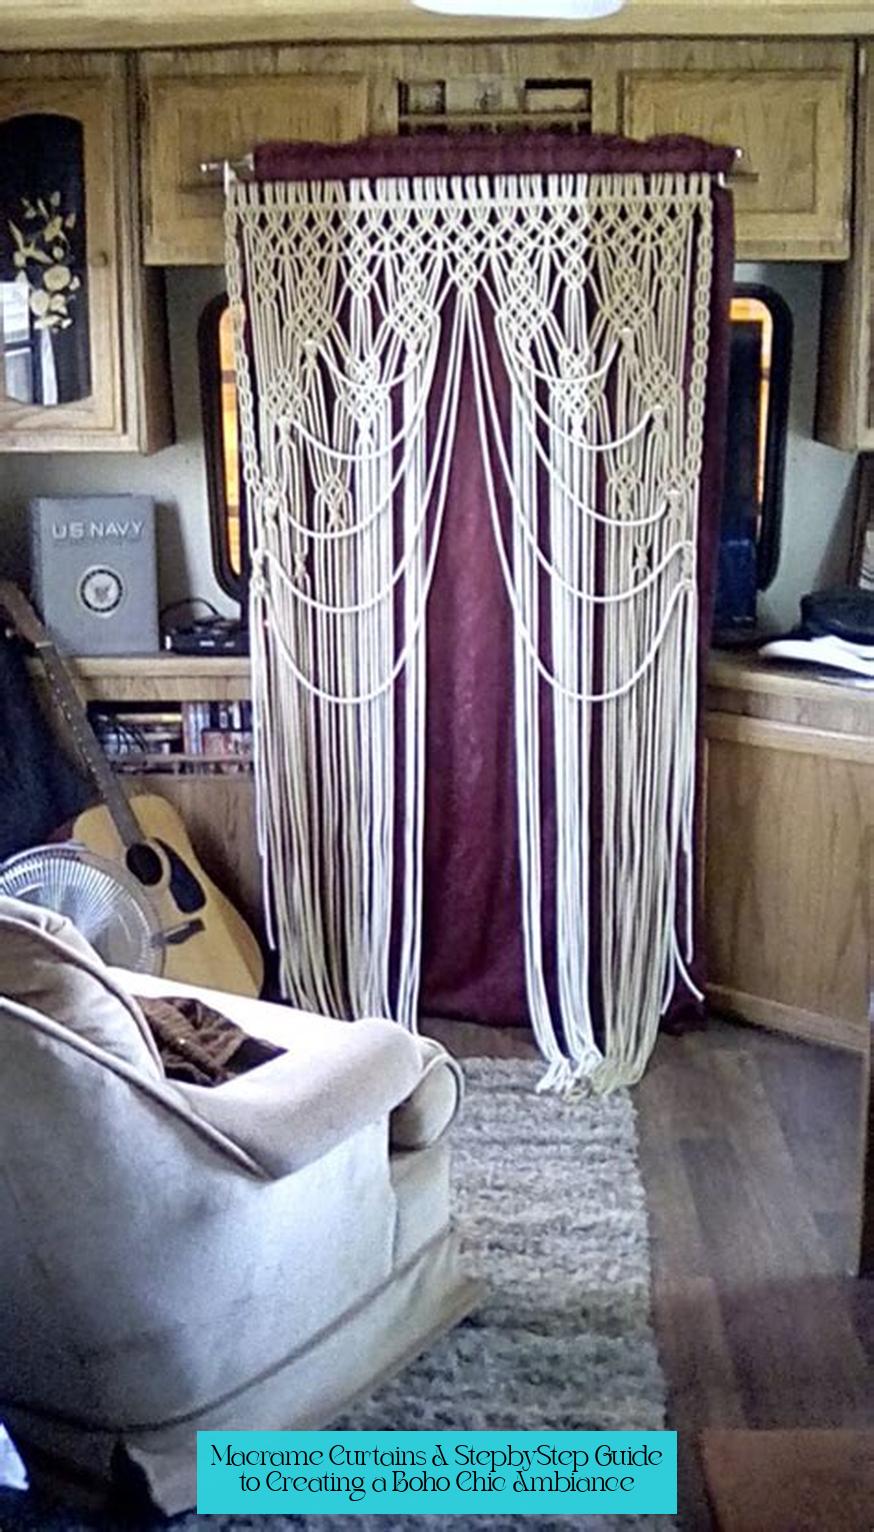 Macrame Curtains: A Step-by-Step Guide to Creating a Boho Chic Ambiance